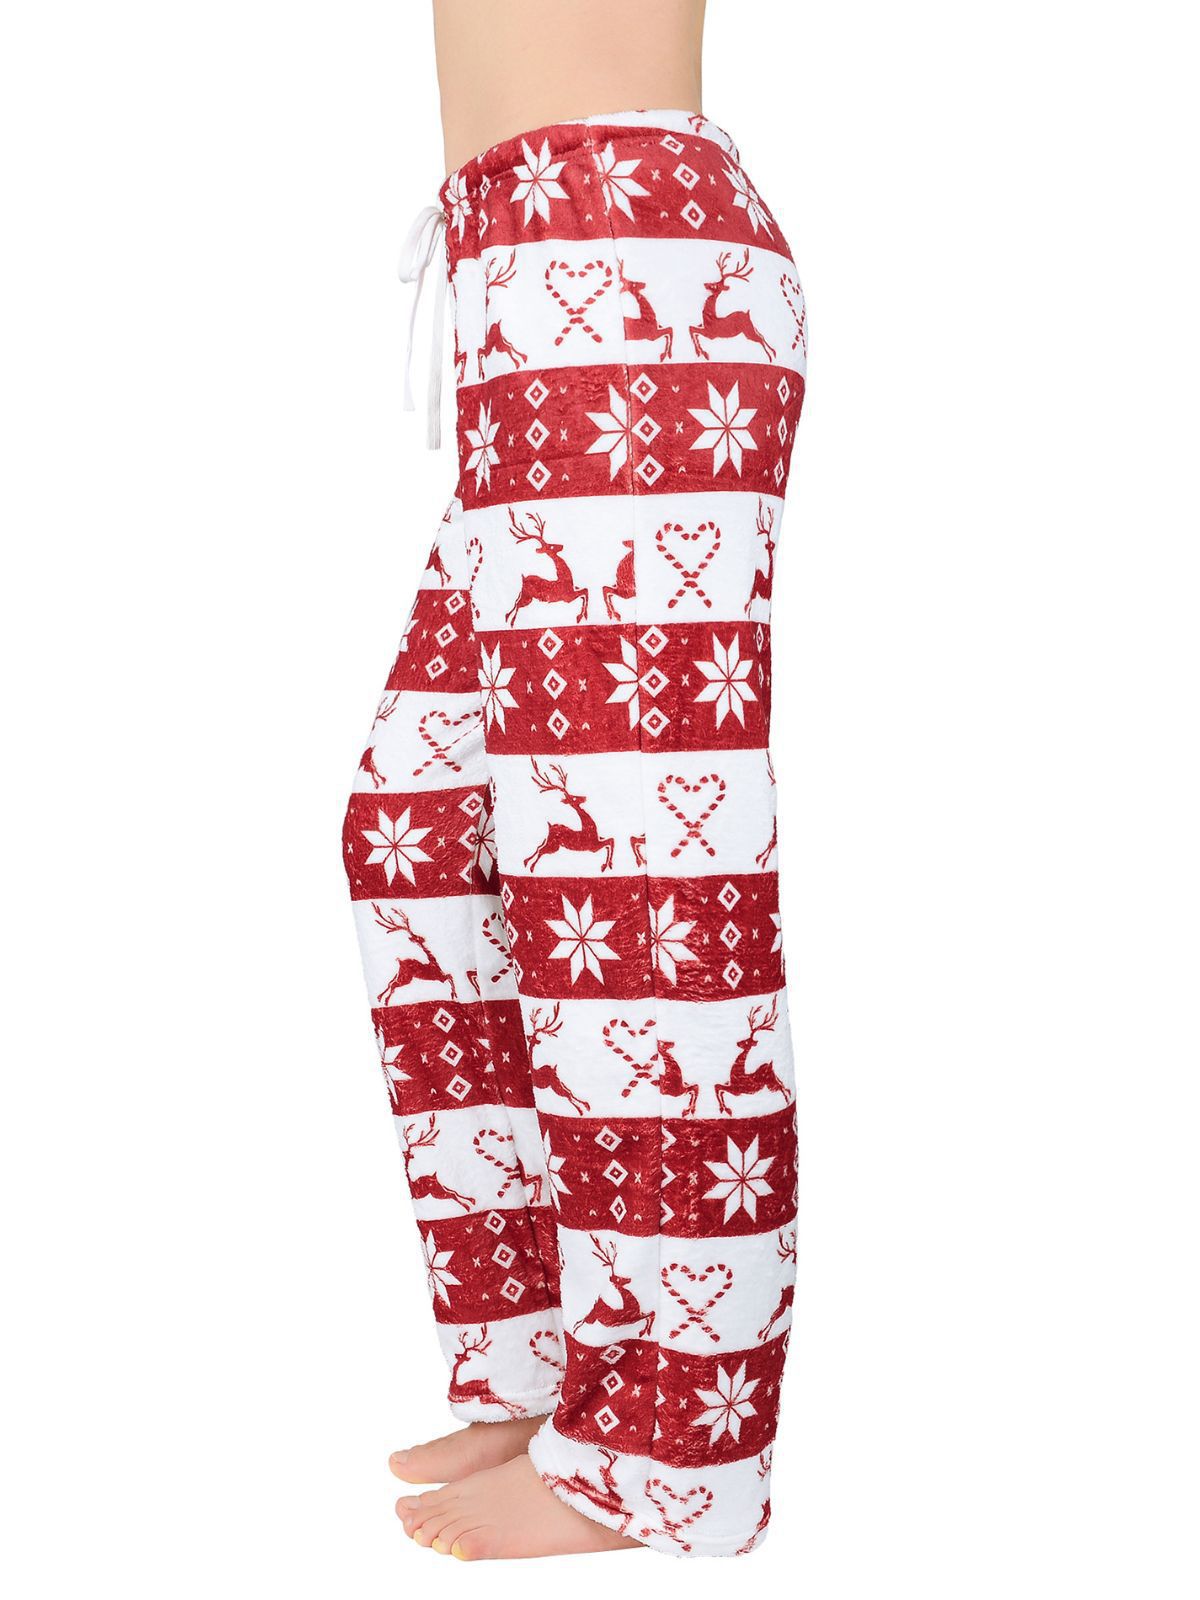 Women's Glamorous Christmas Printed Casual Trousers Pants